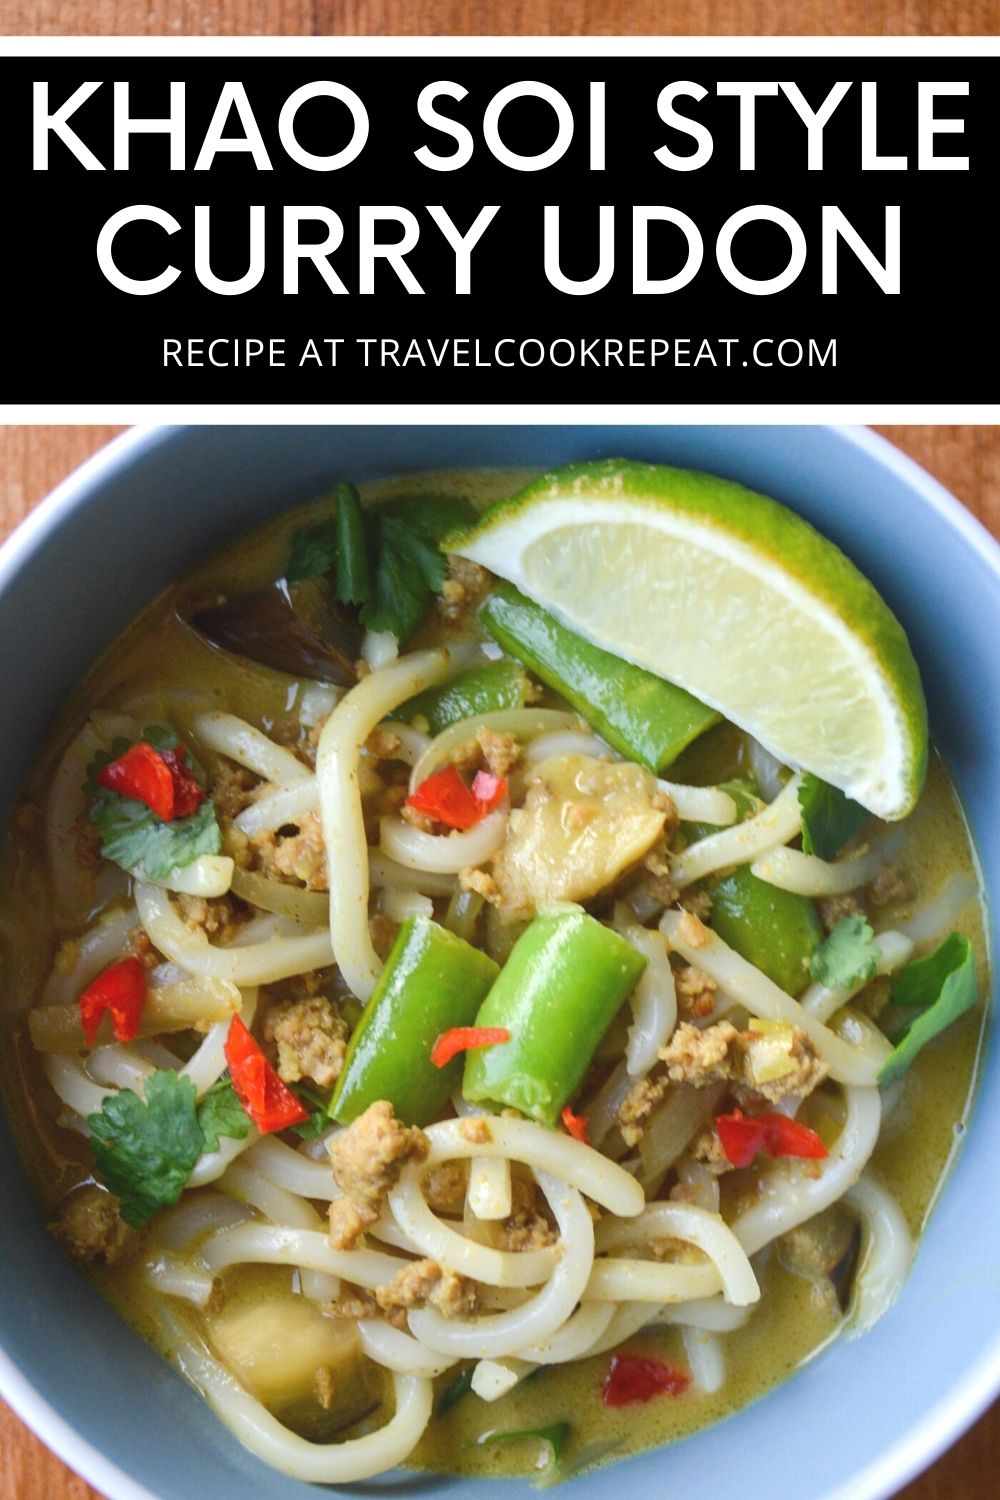 Curry Udon Khao Soi Style